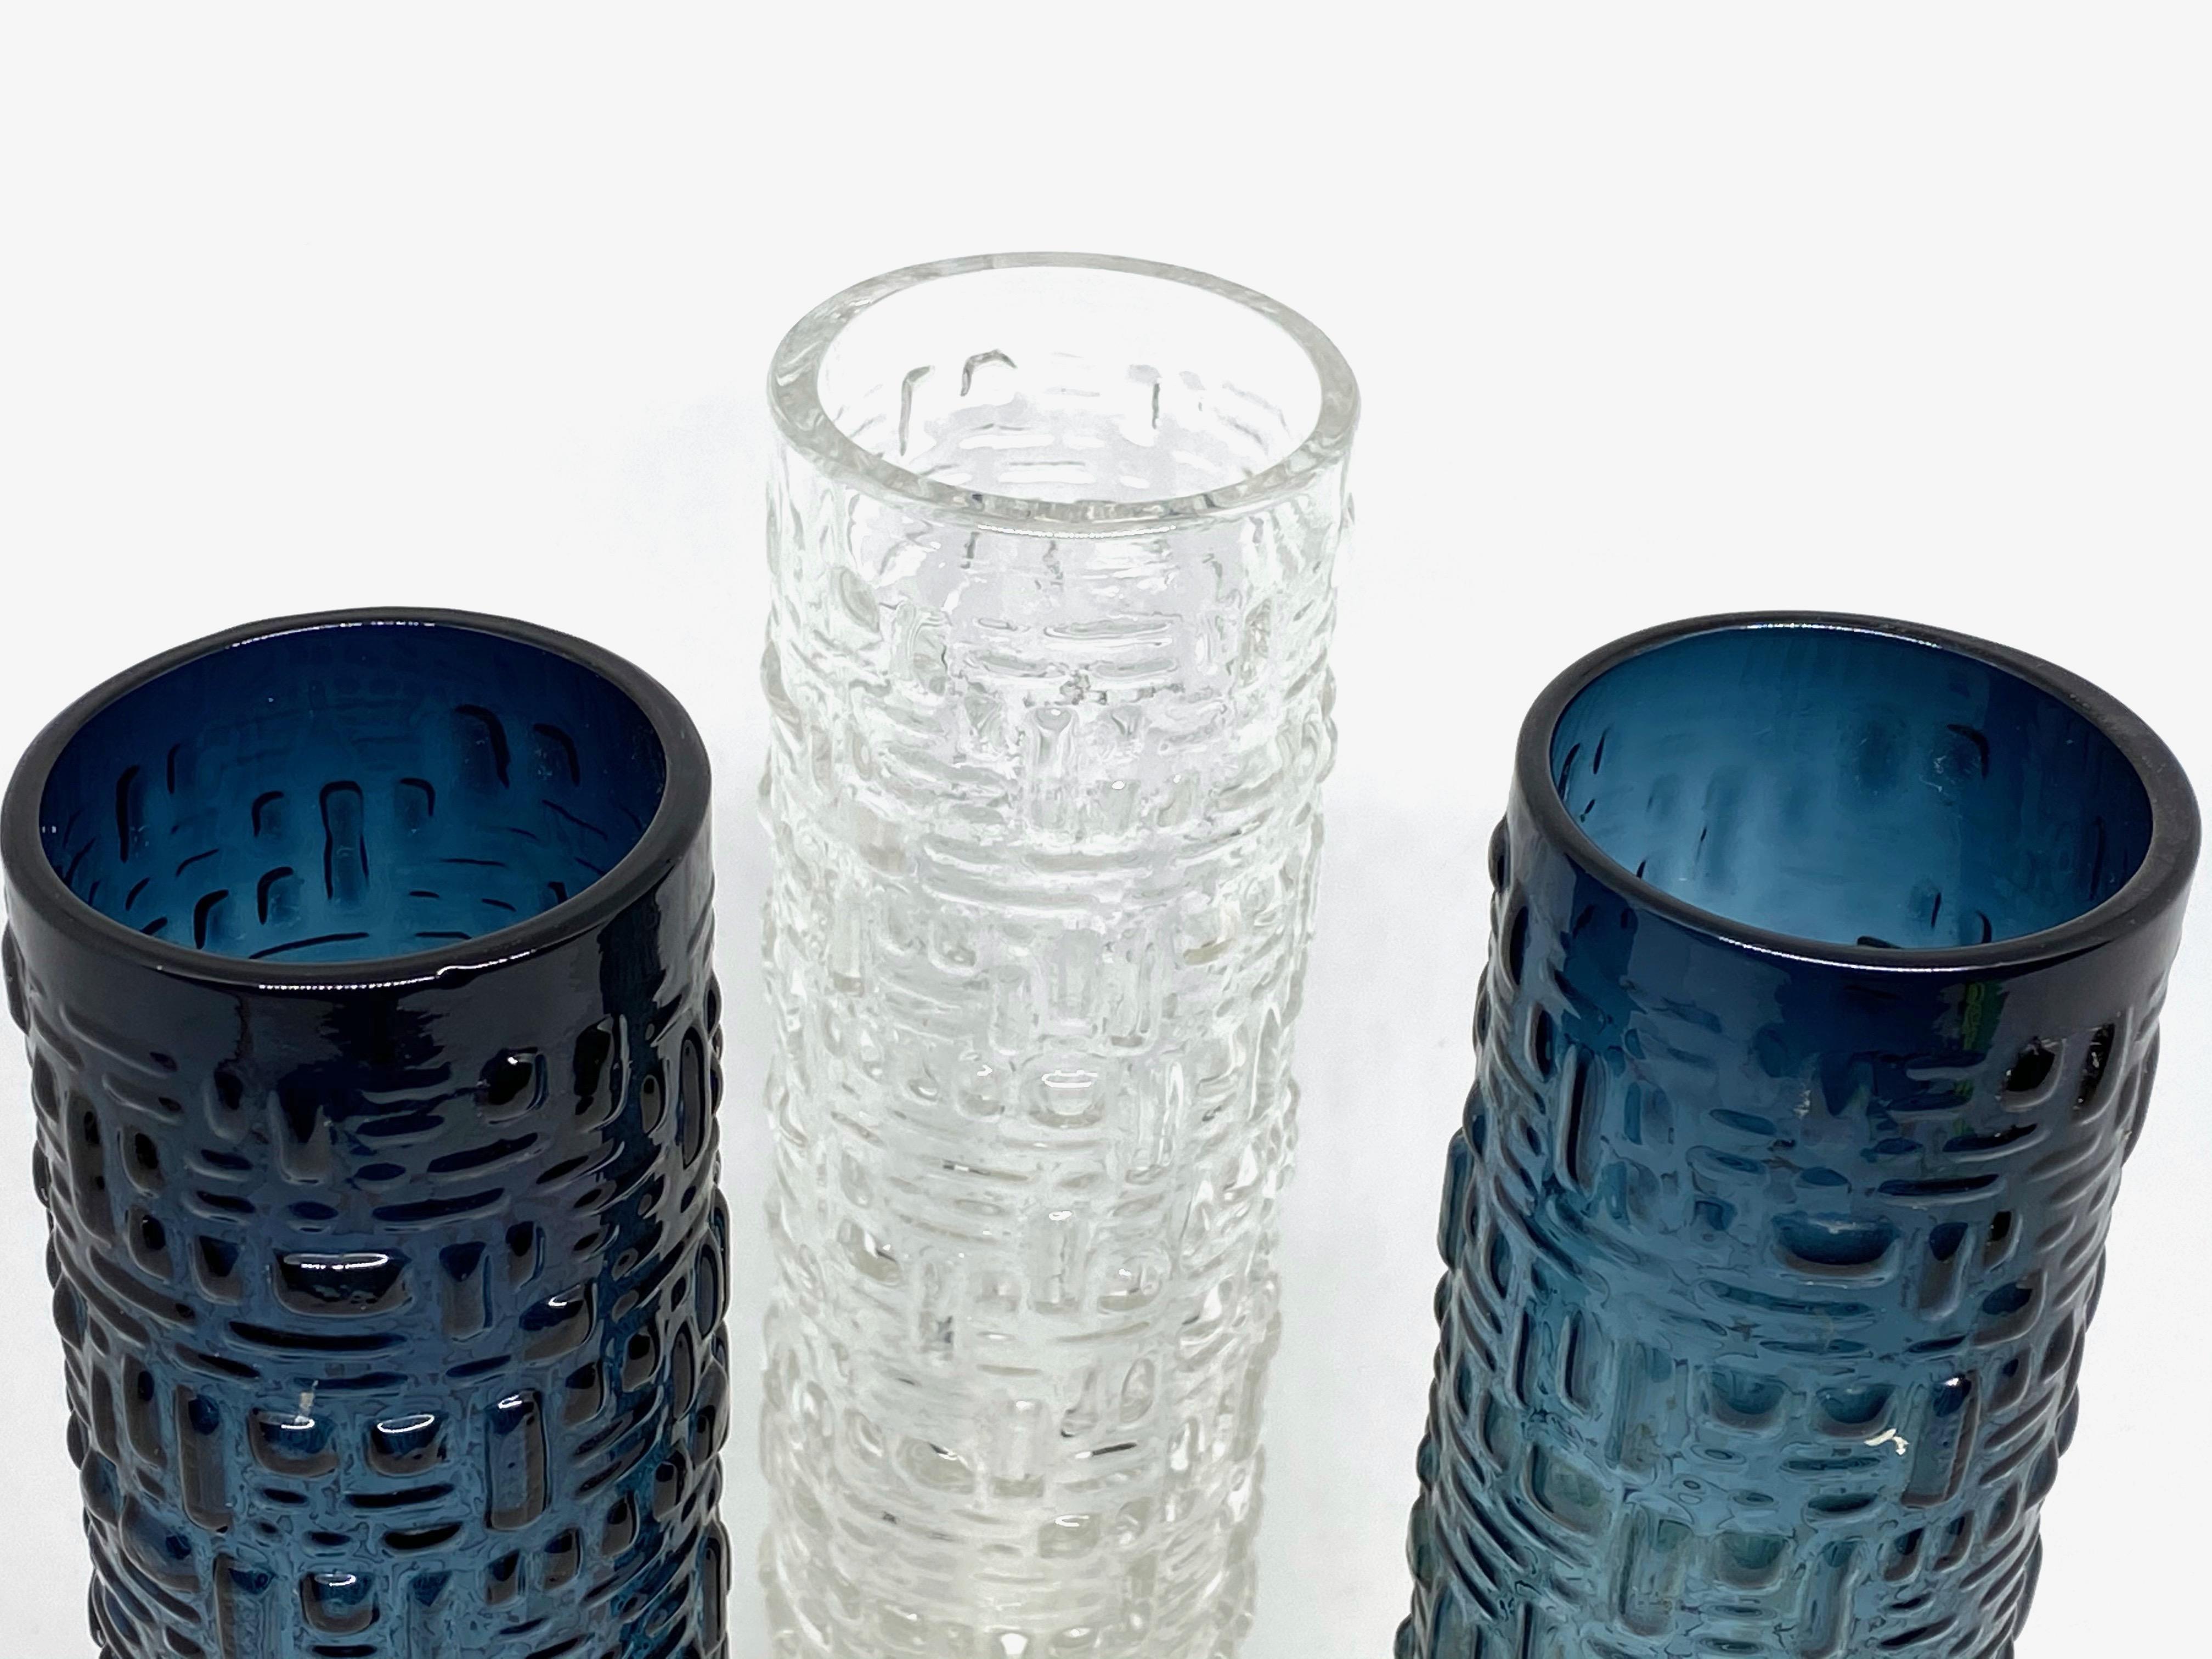 Molded Set of 3 Glass Vase by Emil Funke for Gral Glass, circa 1970s For Sale